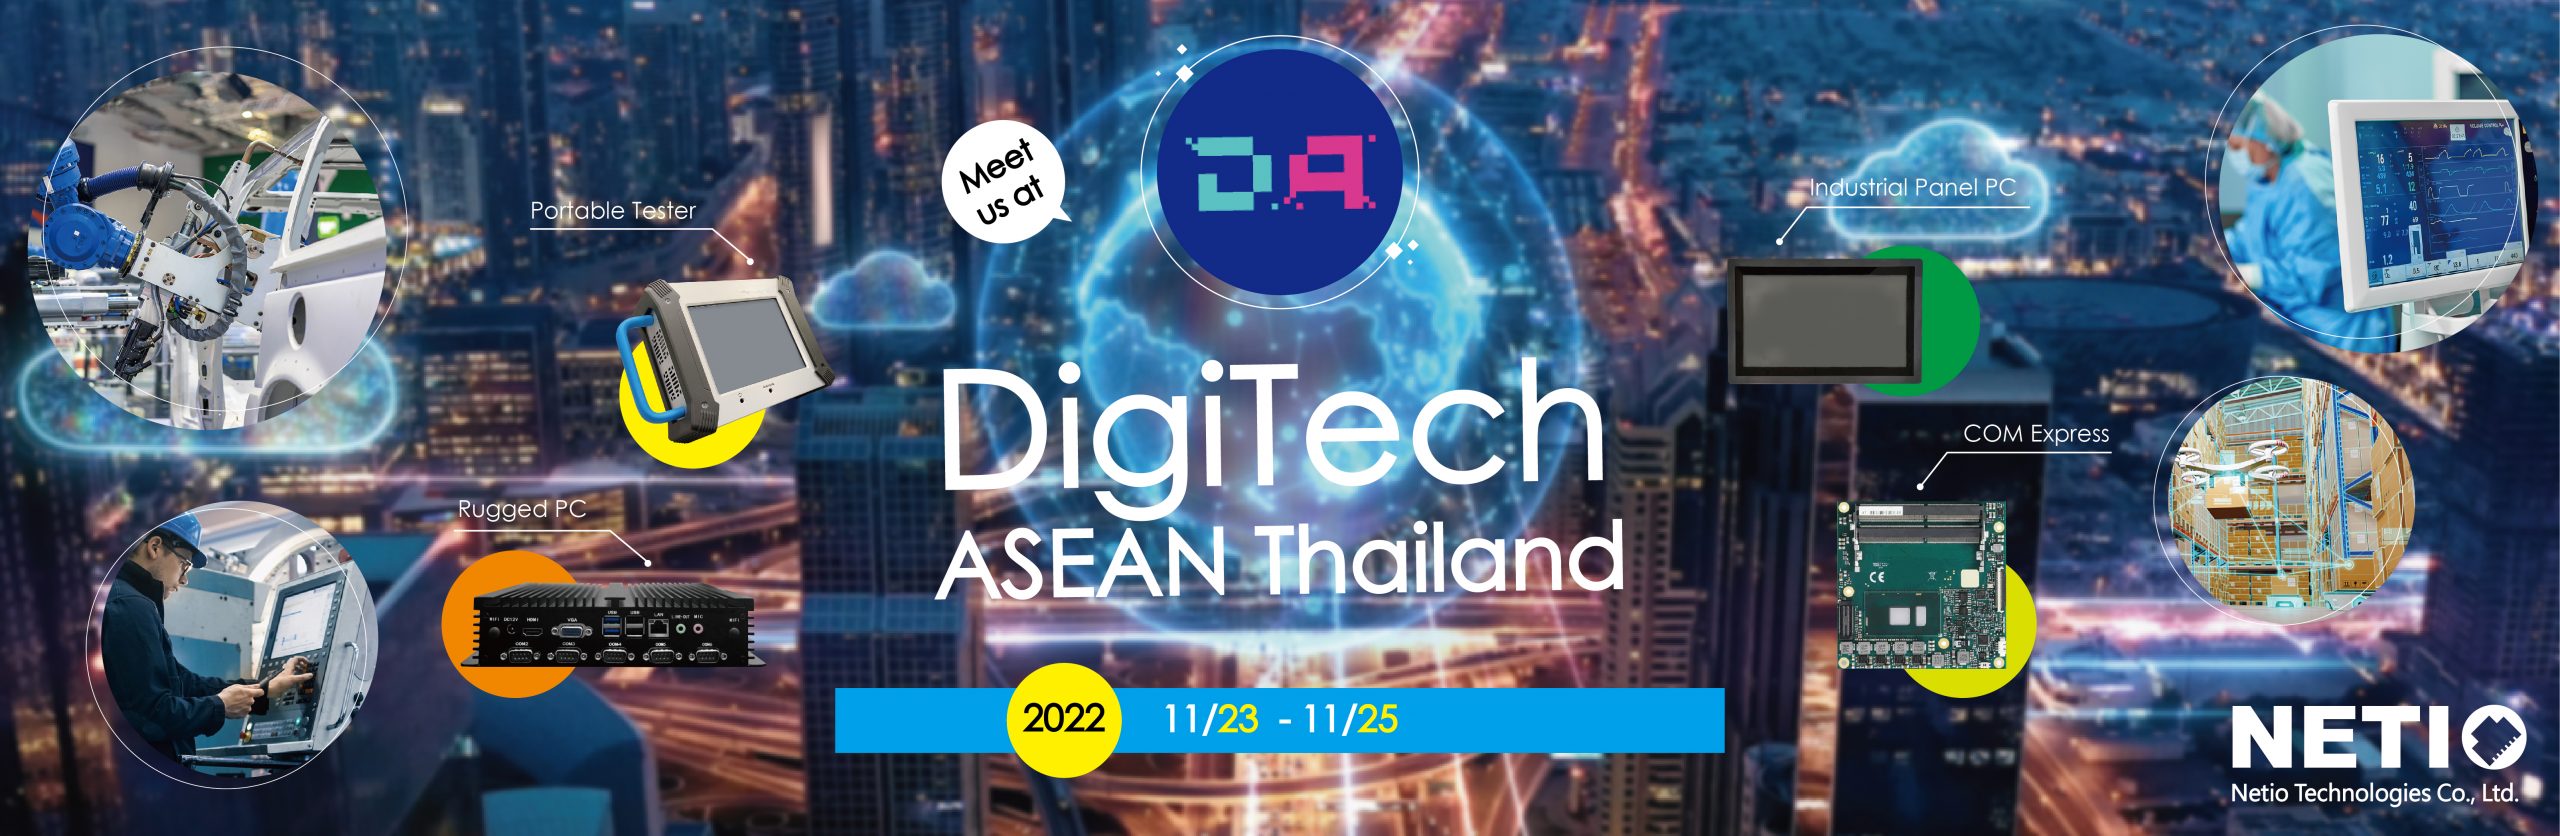 The premier digital and technology trade show in Thailand